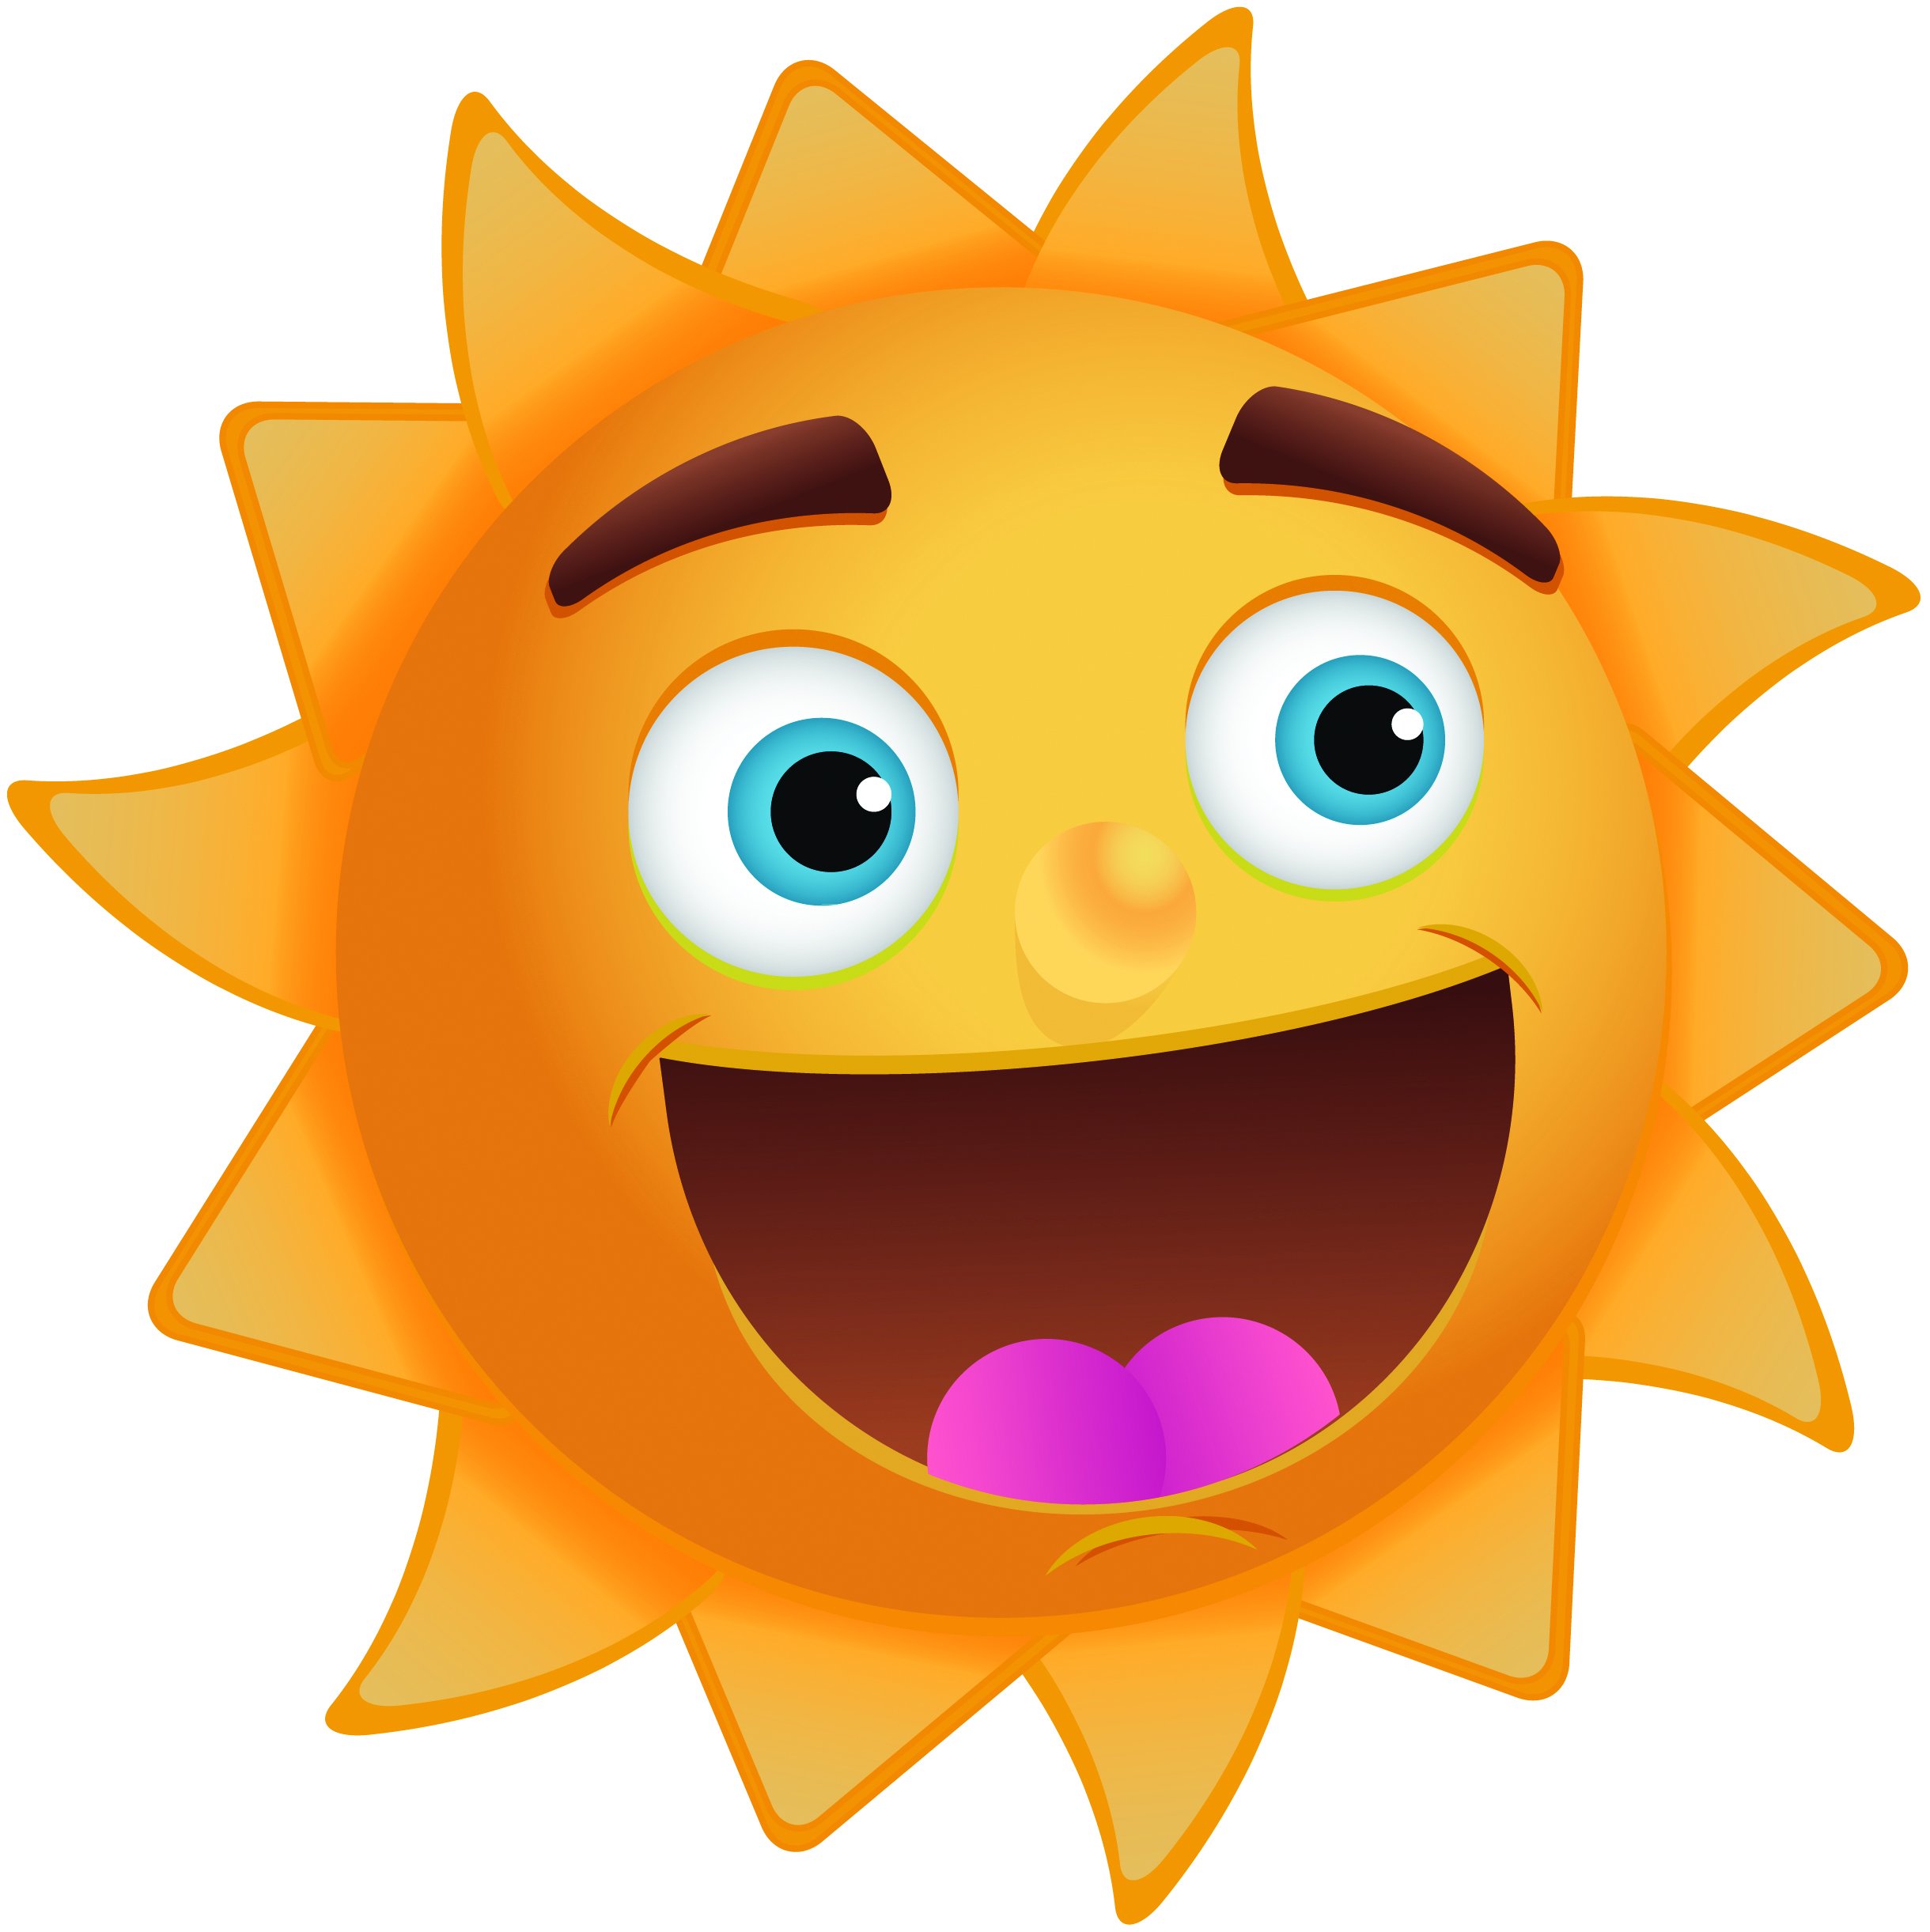 Happy Sun Clip Art Image With Great Big Smile Kootation   Clipart Best    